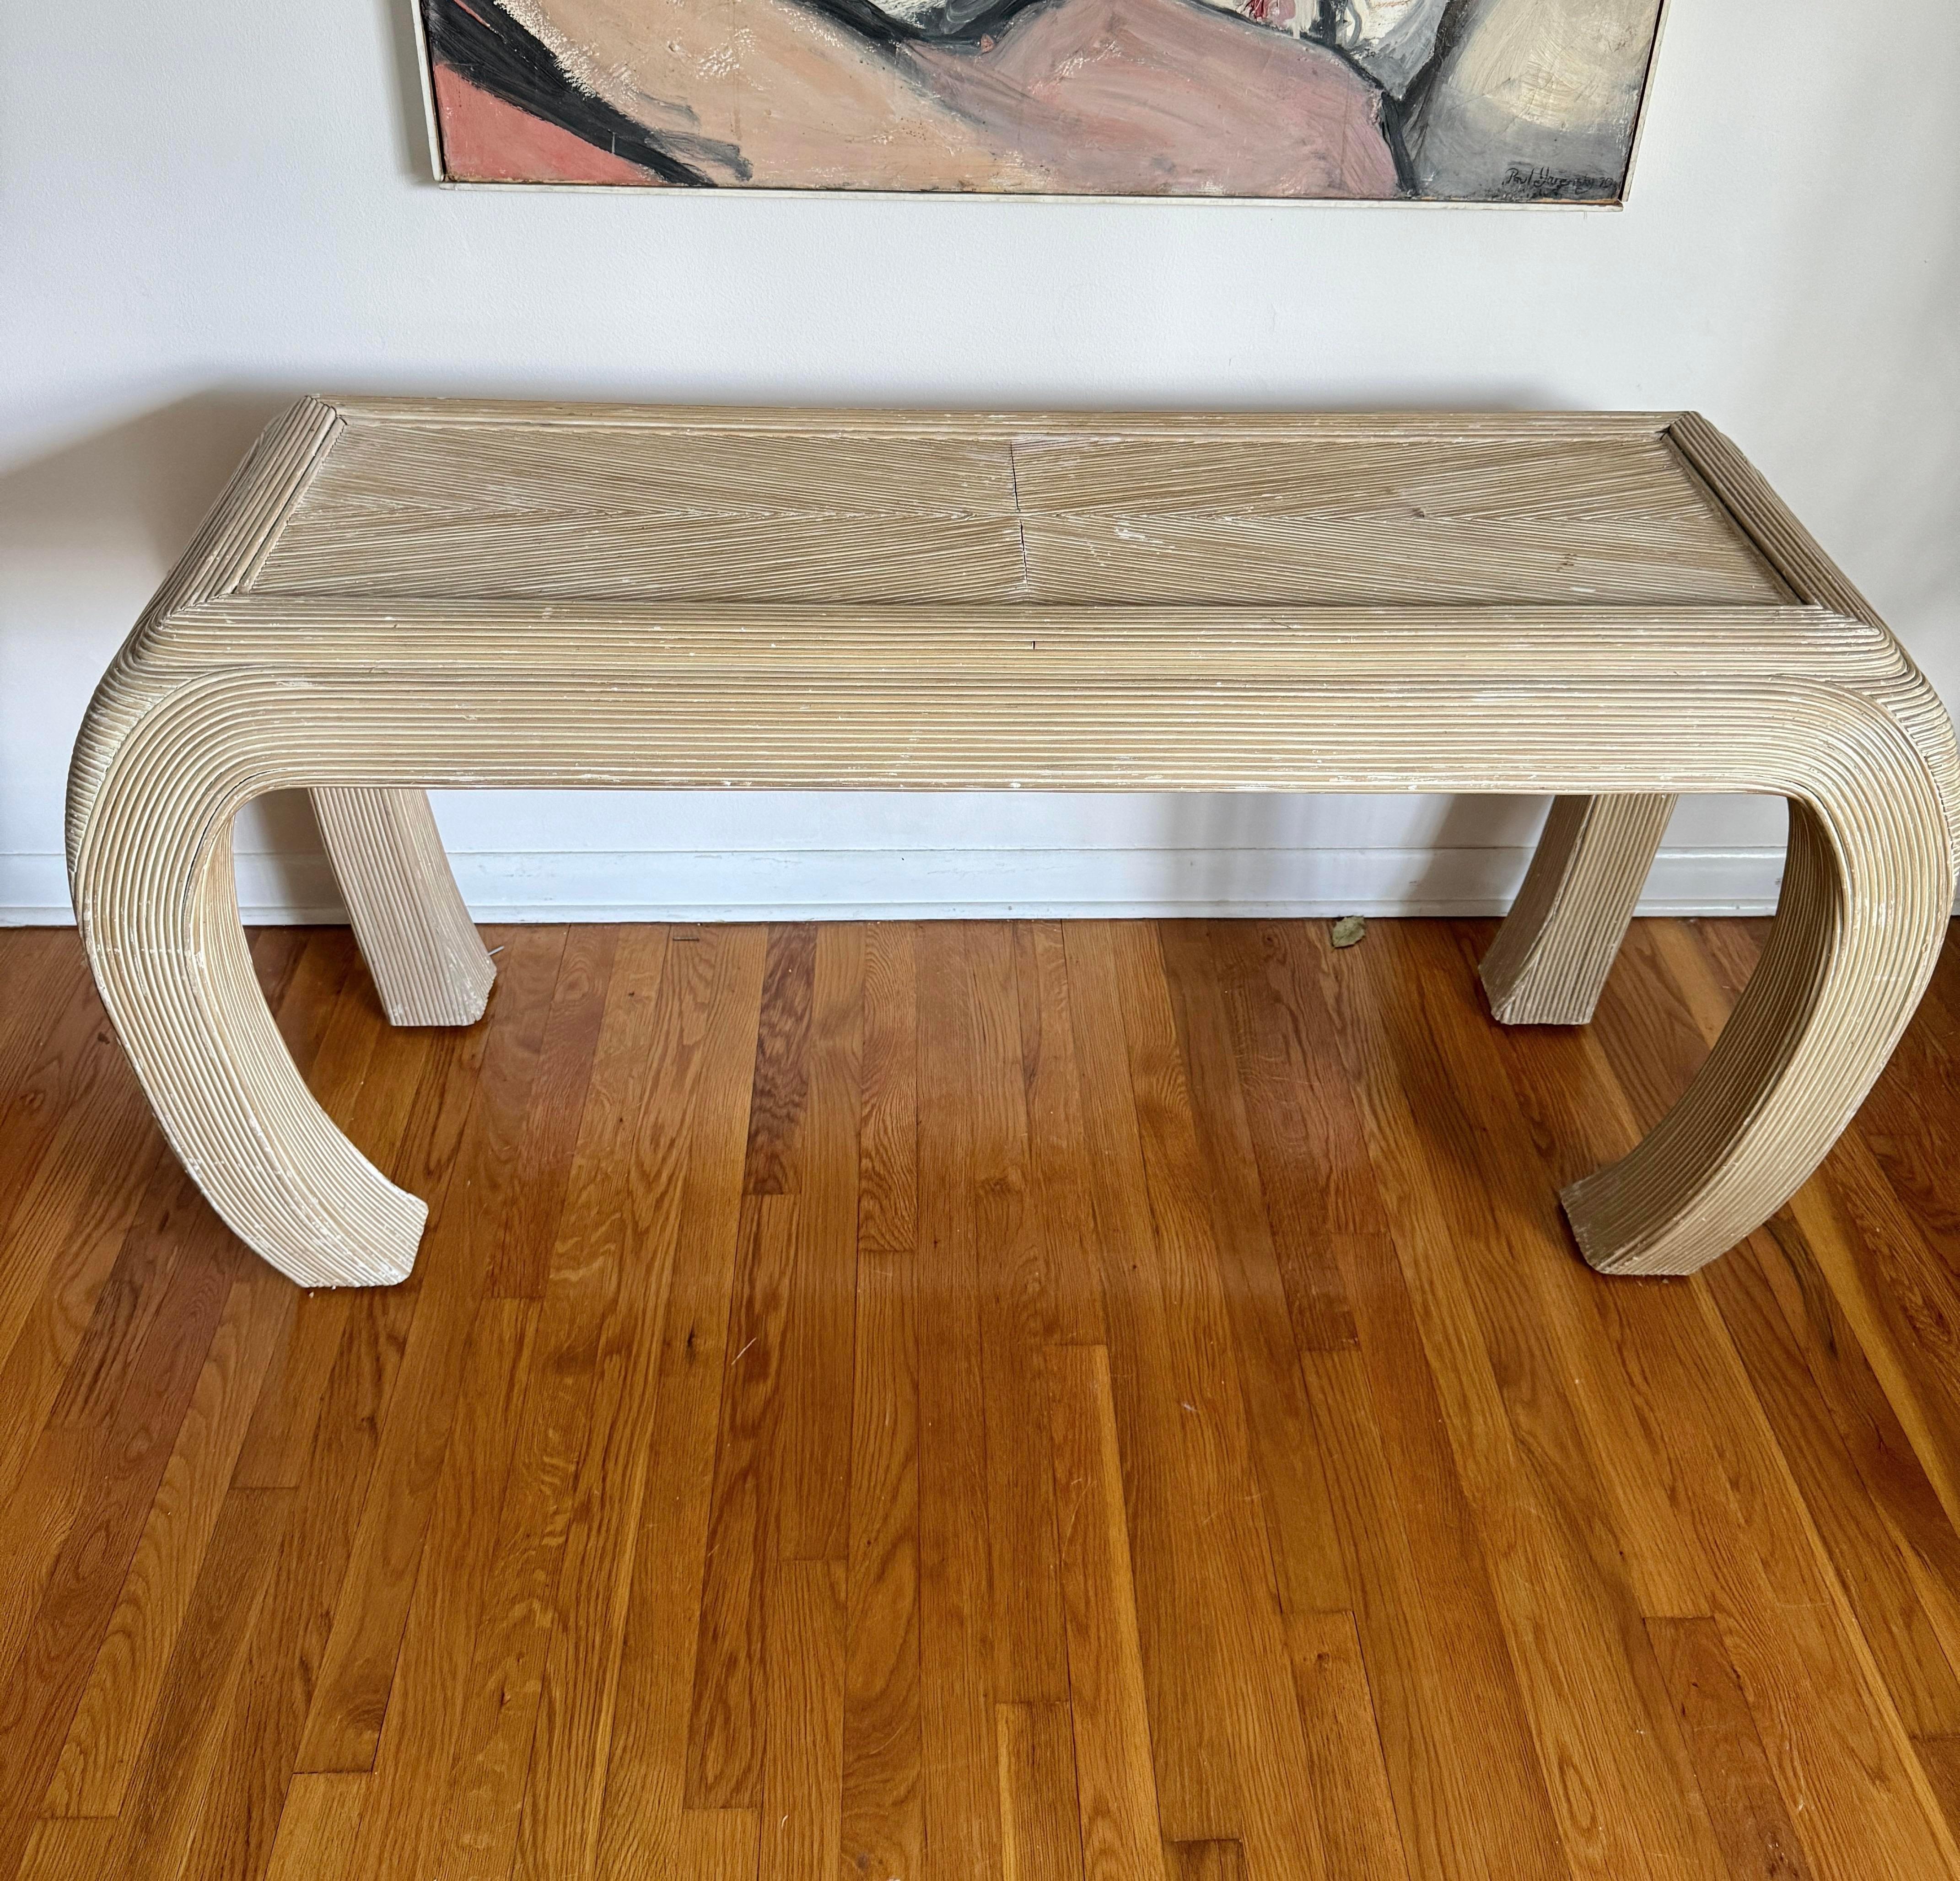 1980s vintage pencil reed entry or sofa table in the style of Karl Springer.
